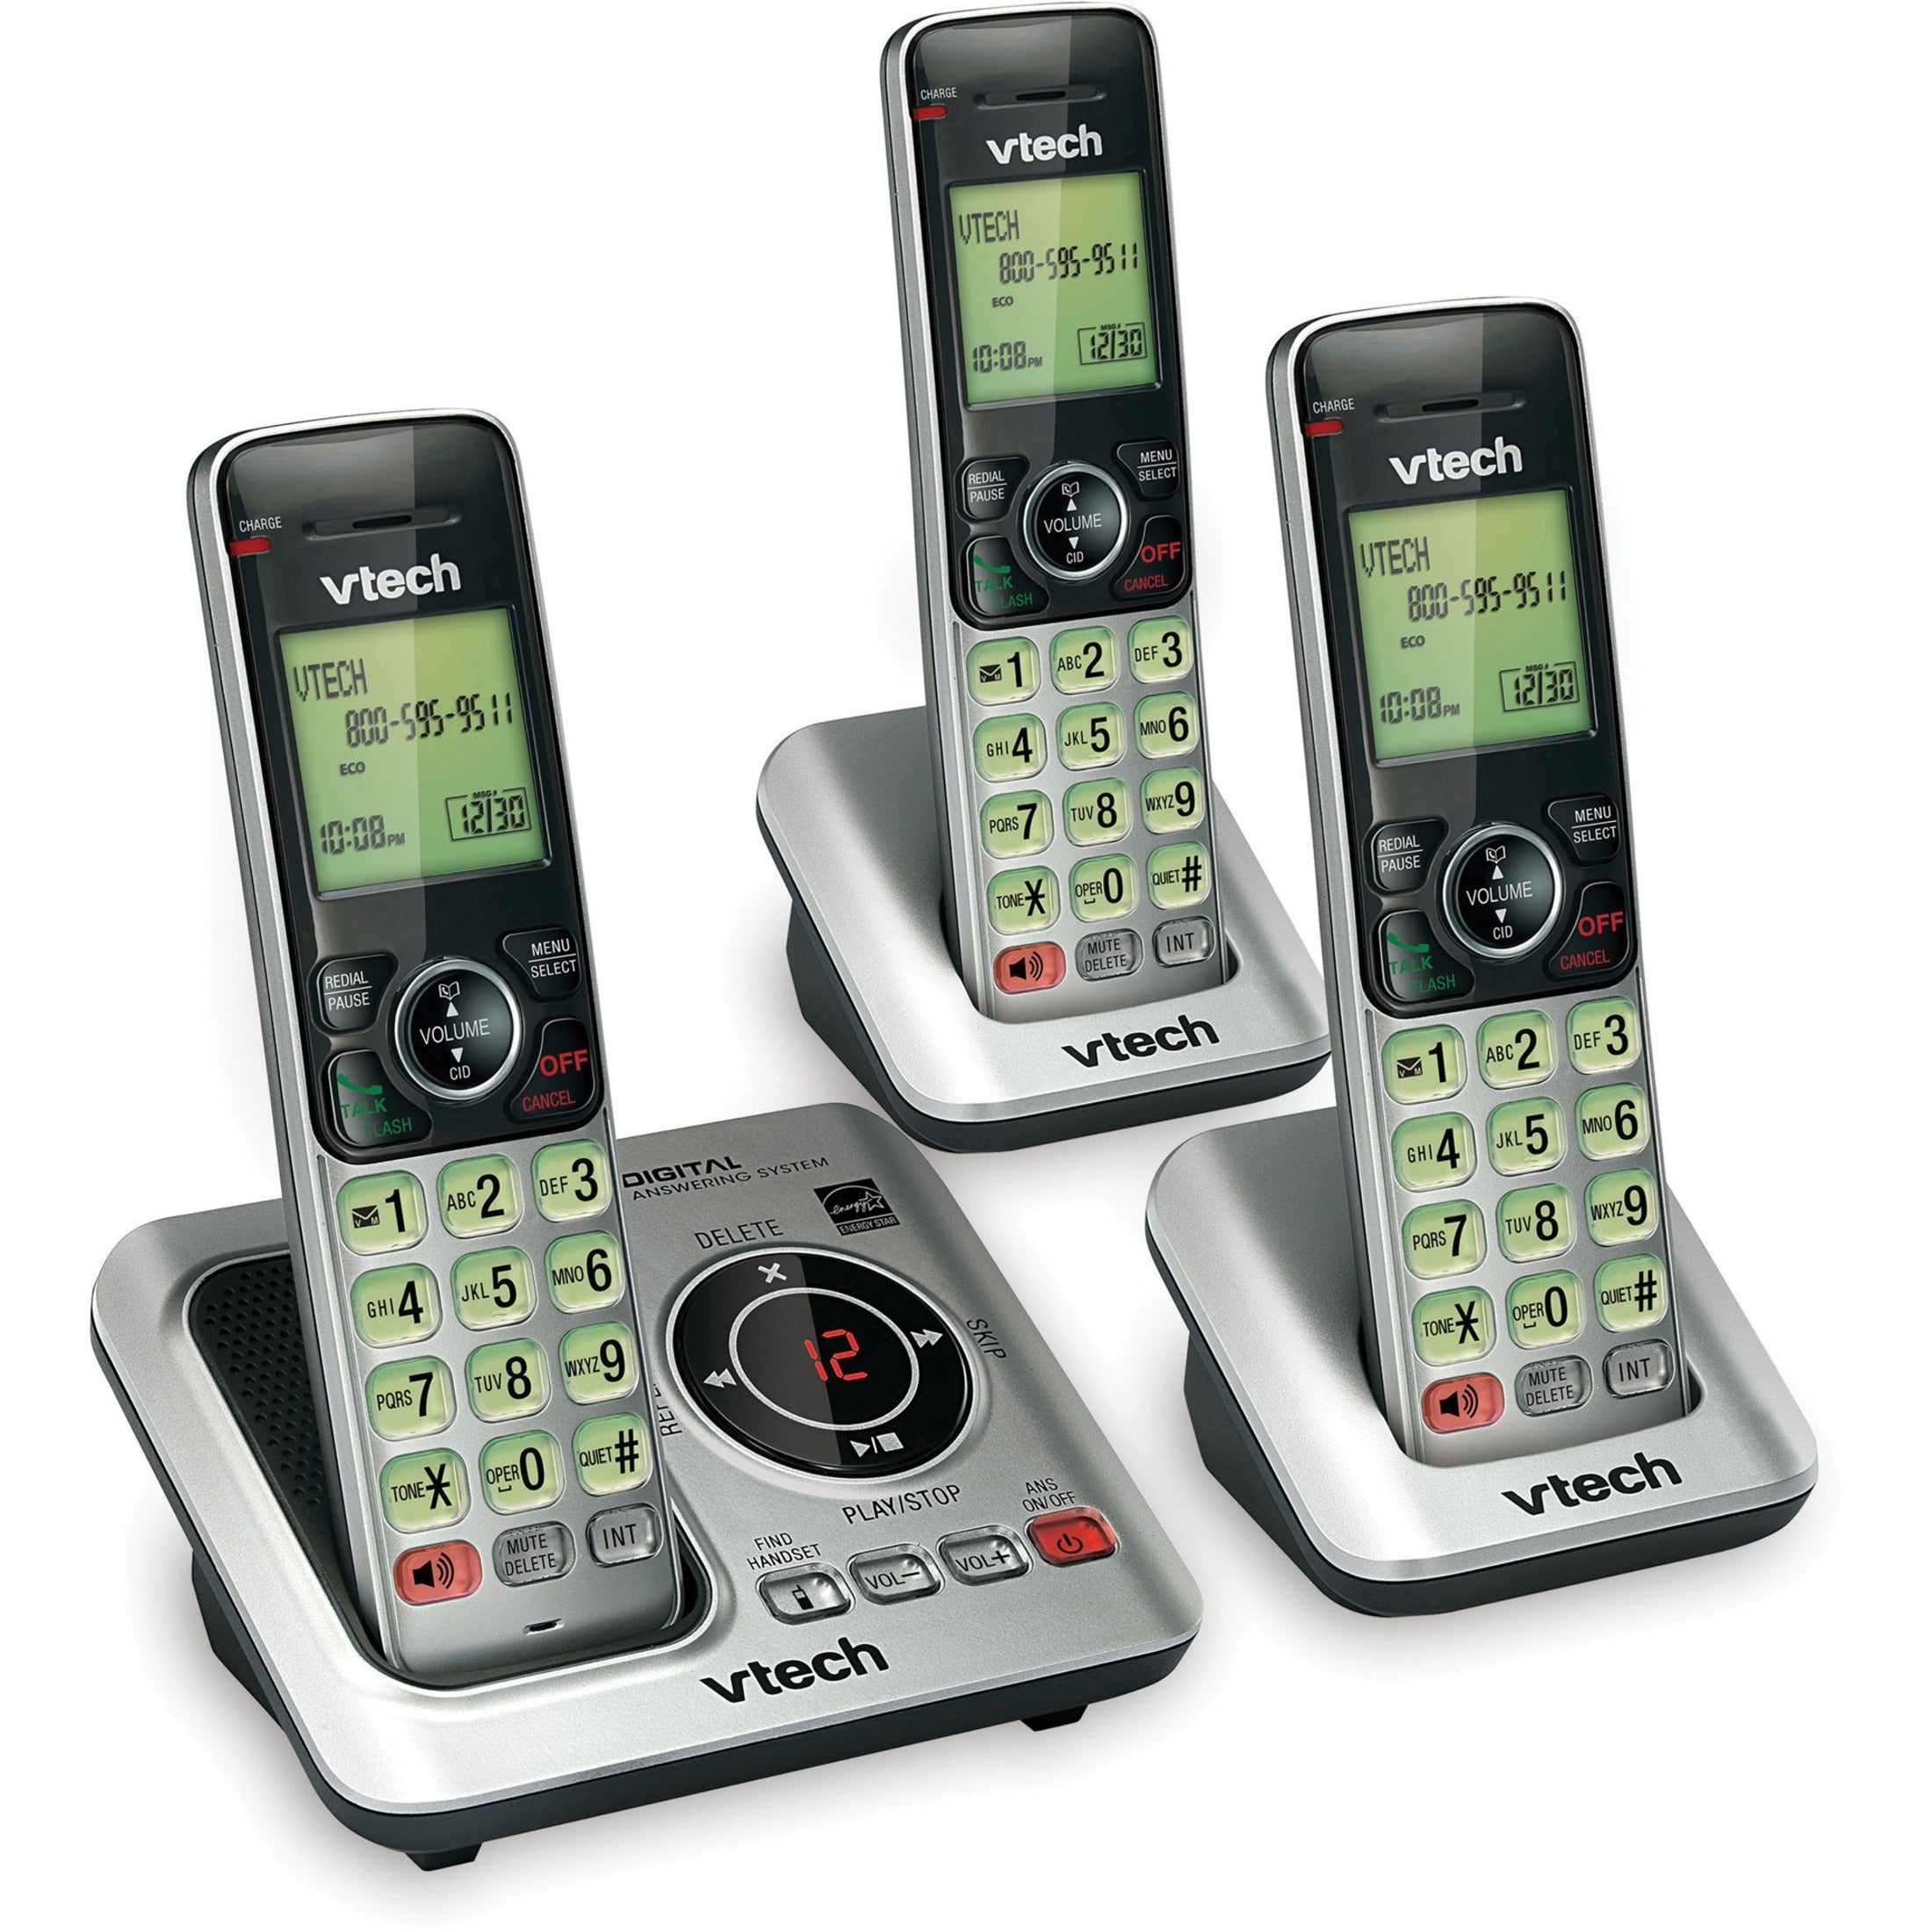 VTech CS6629-3 DECT 6.0 Cordless Phone - 3 Handset Answering System with Caller ID/Call Waiting [Discontinued]